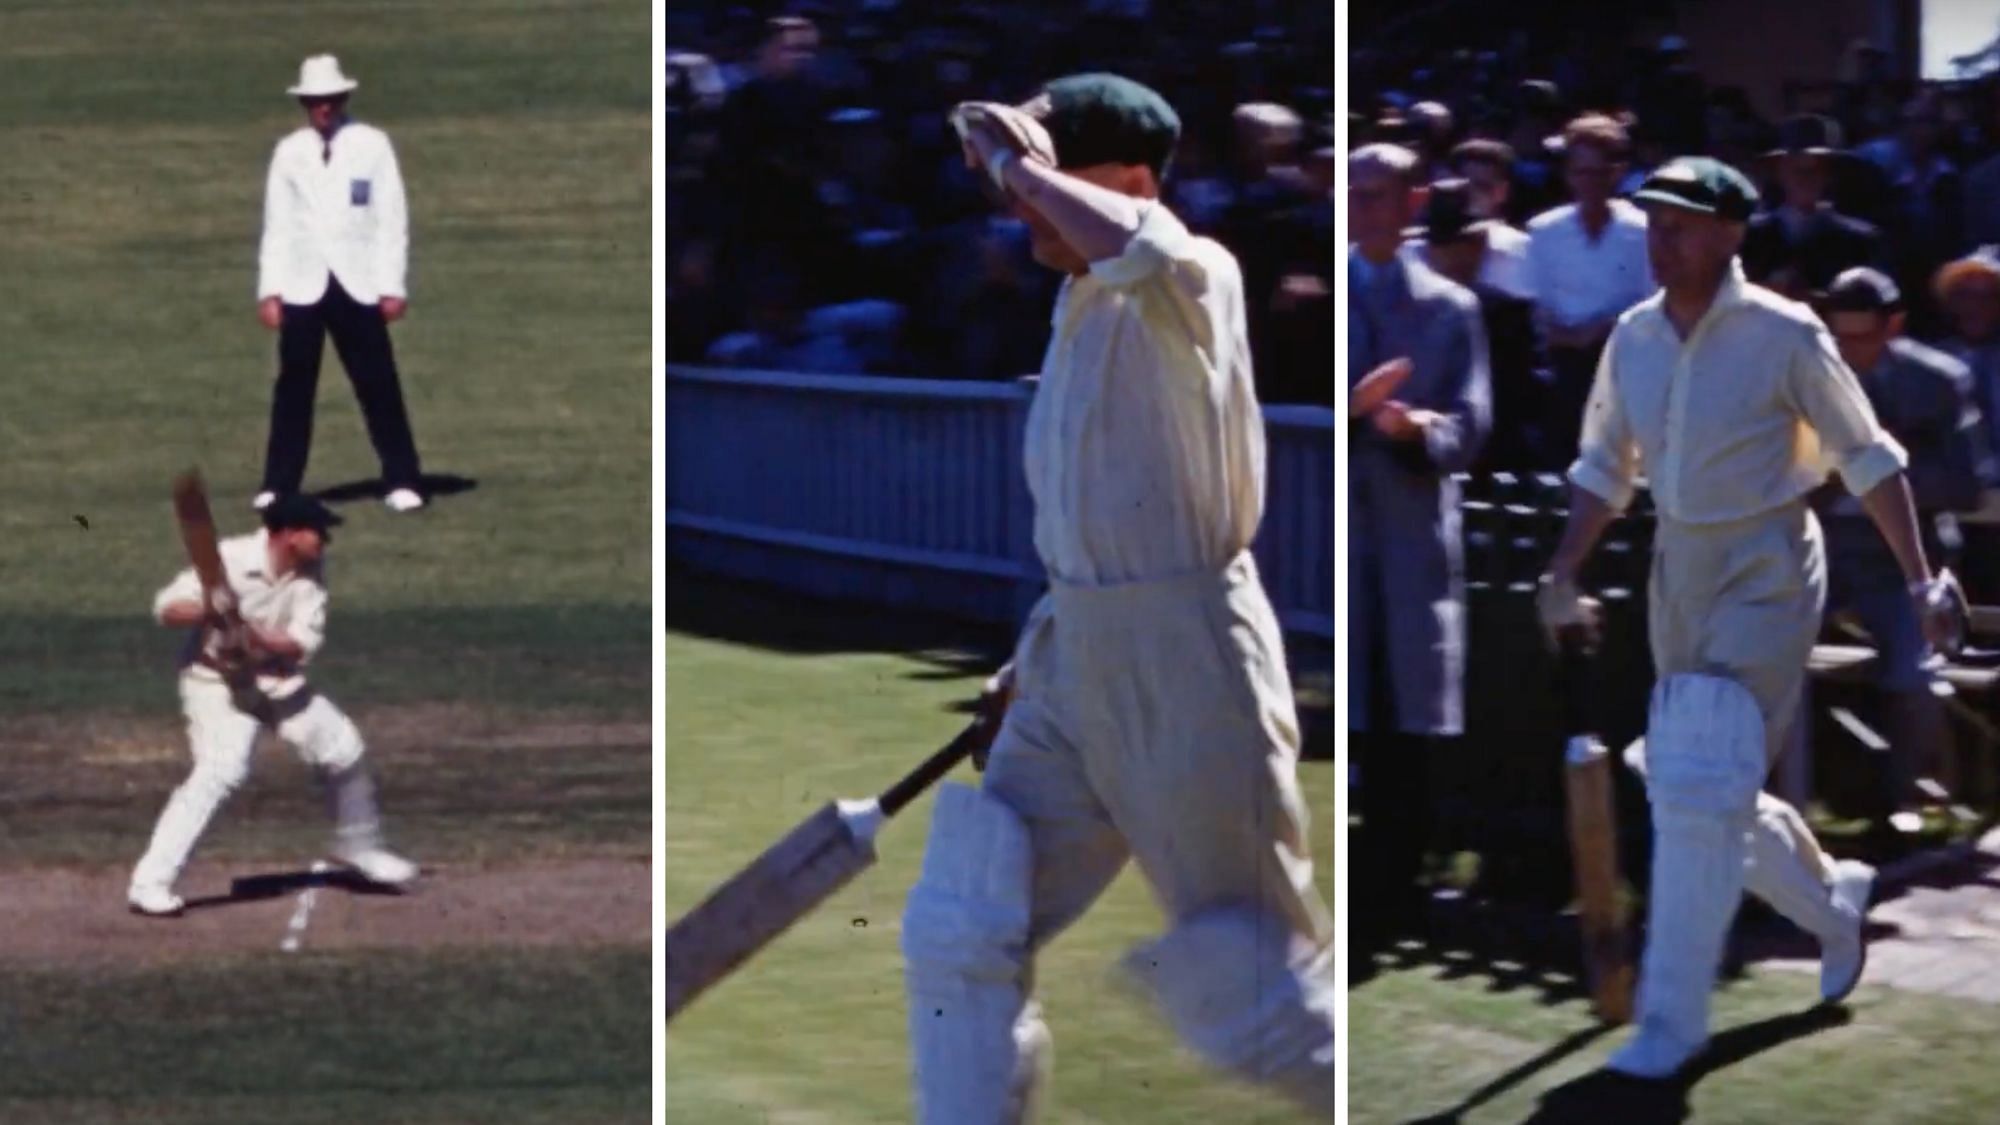 Watch a new video of Sir Don Bradman that was recently found.